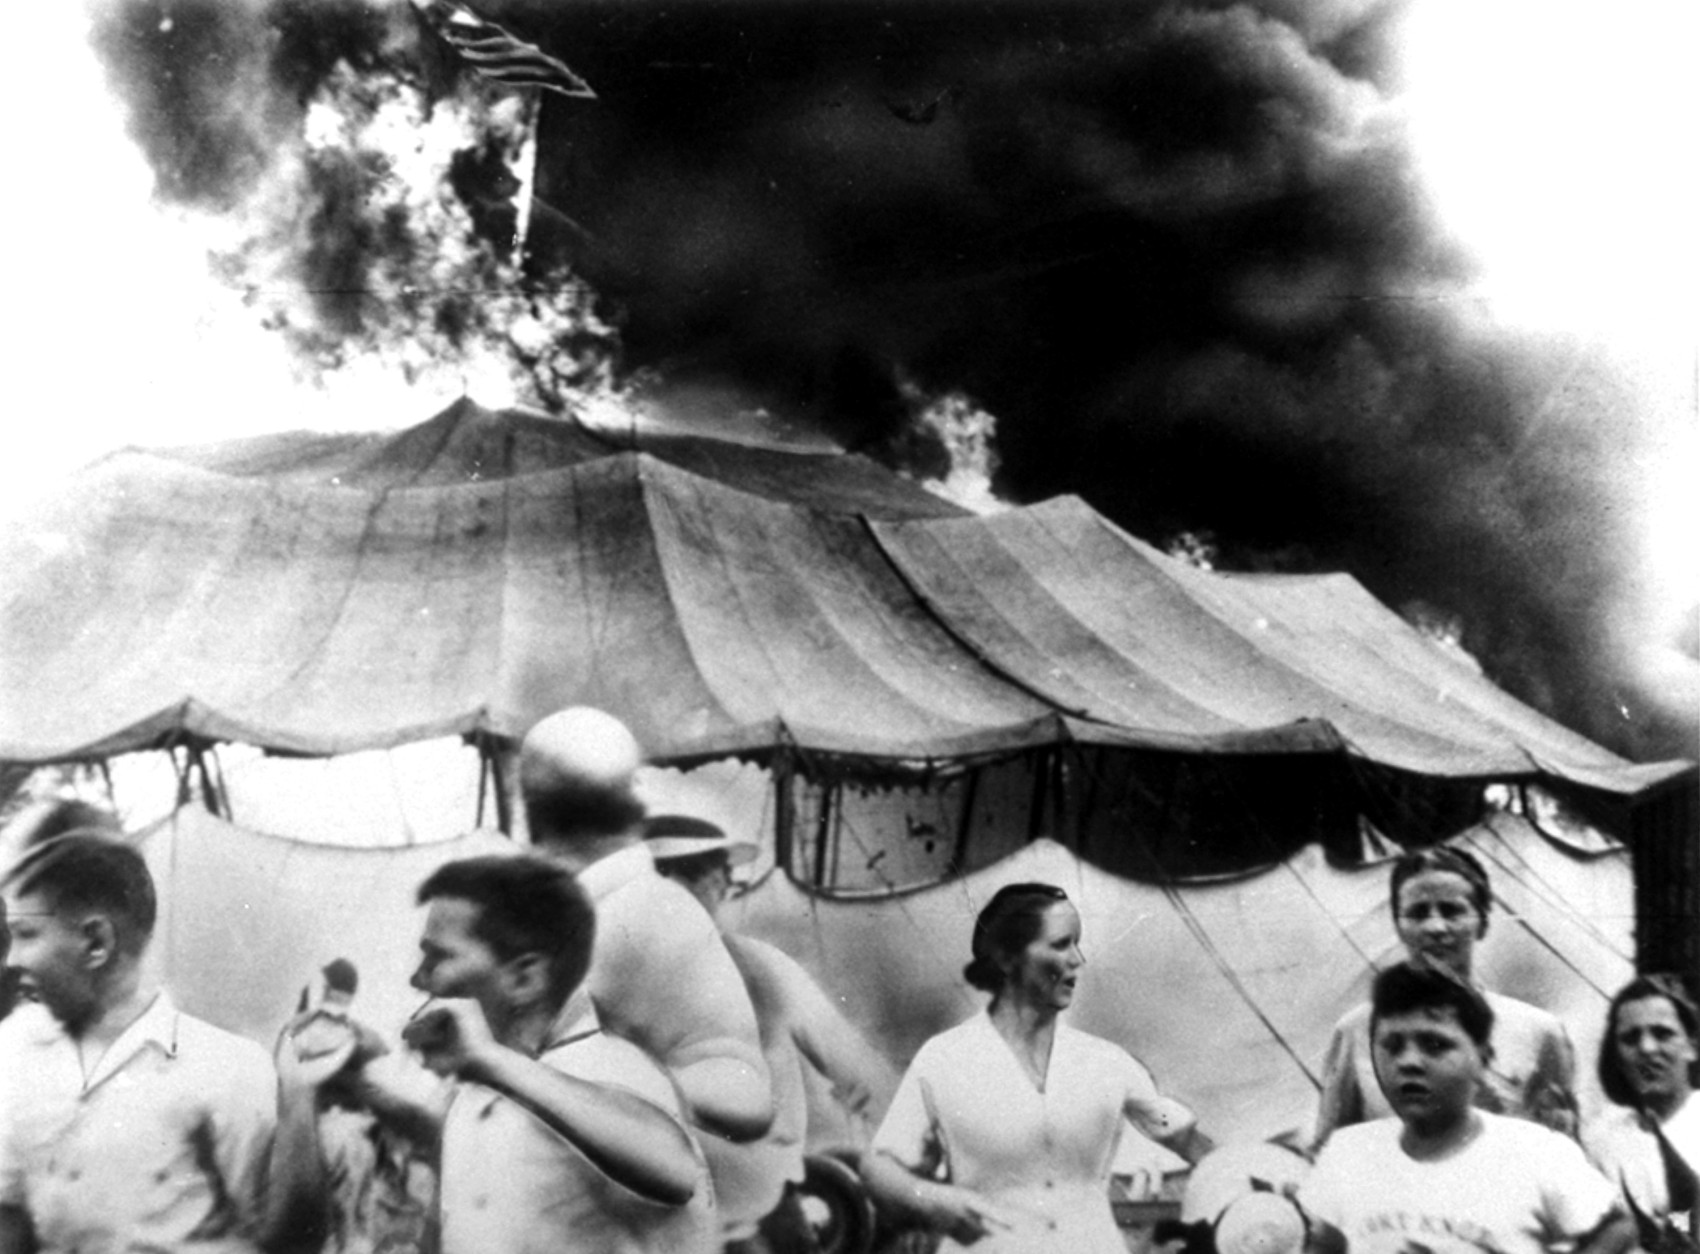 This was the scene of pandemonium at Hartford, Conn., on July 6, 1944, when a fire in which over 145 persons died, struck the tented Ringling Bros. Barnum and Bailey Circus.  On July 16, the circus folded its mammoth tent for the last time after a performance at Pittsburgh, Pa., and then appeared in 1957 in indoor arenas.  Labor troubles, bad weather, and rising costs sounded the death knell for the circus tour which thrilled millions of youngsters and grownups.  (AP Photo)